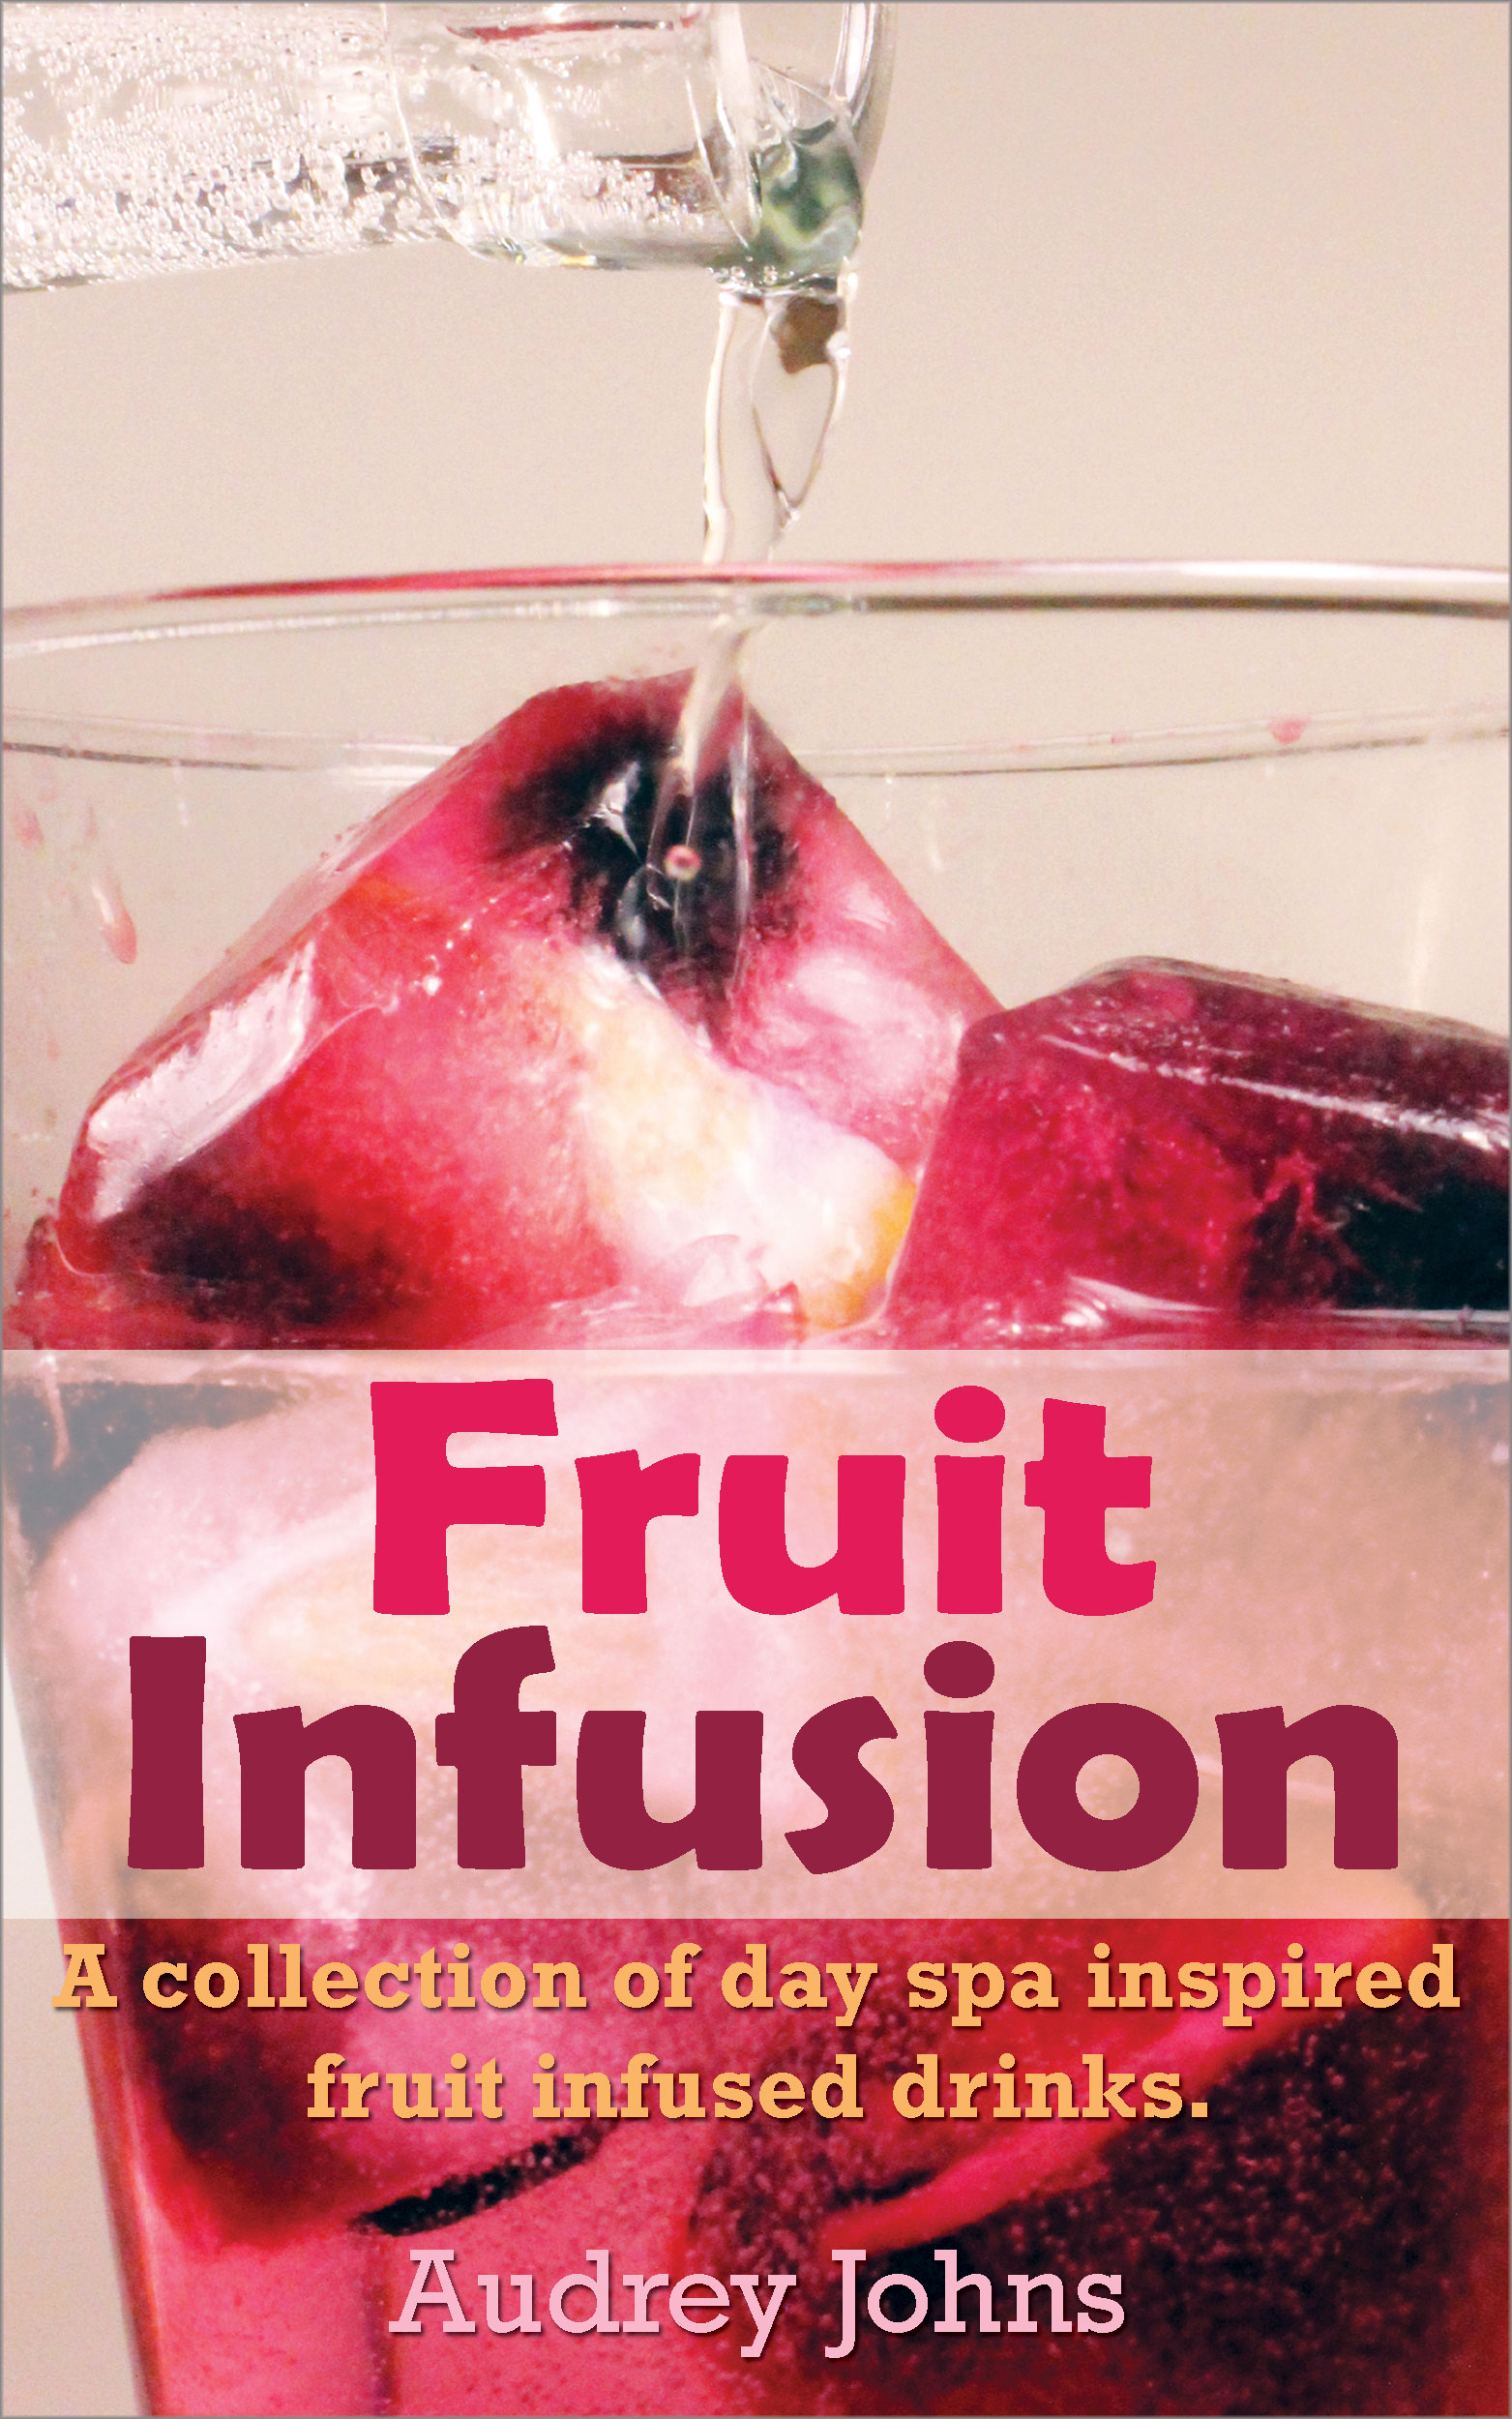 Fruit Infusion: A Collection of Day Spa Inspired, Fruit Infused Waters is available on Amazon Kindle